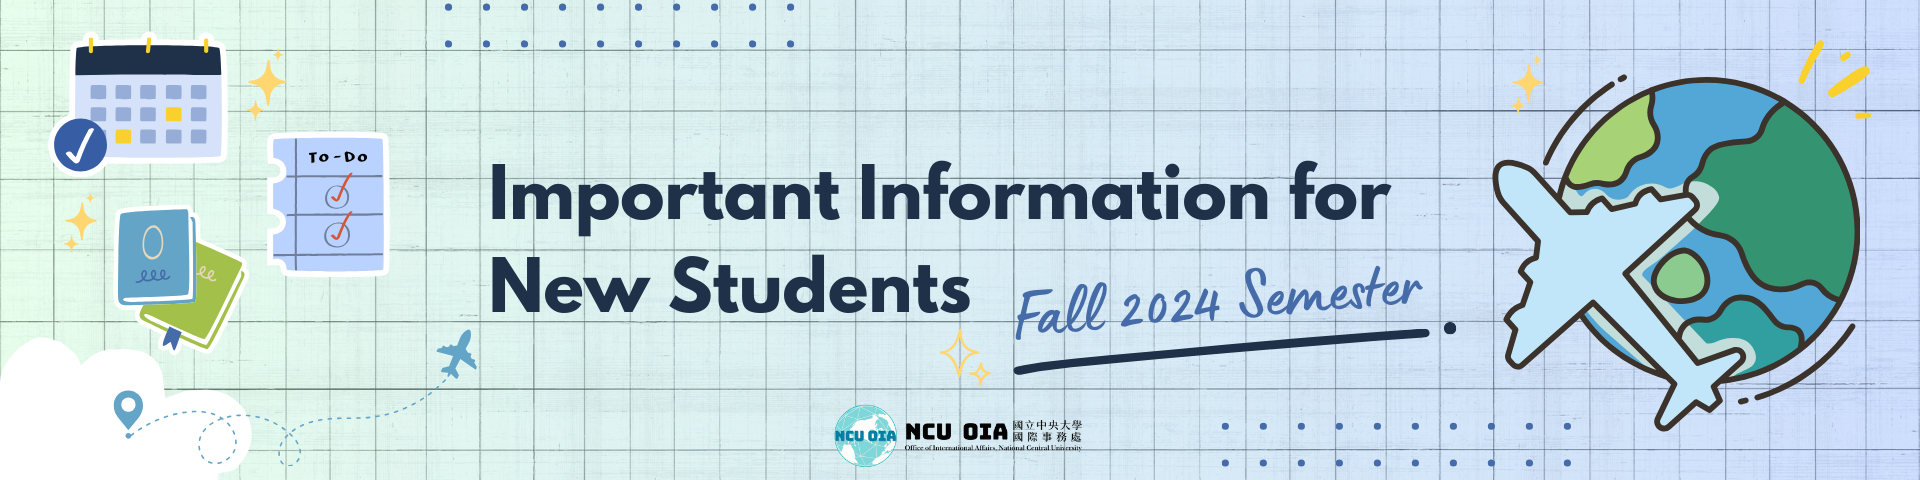 Important Information for New Students of Fall 2024 Semester